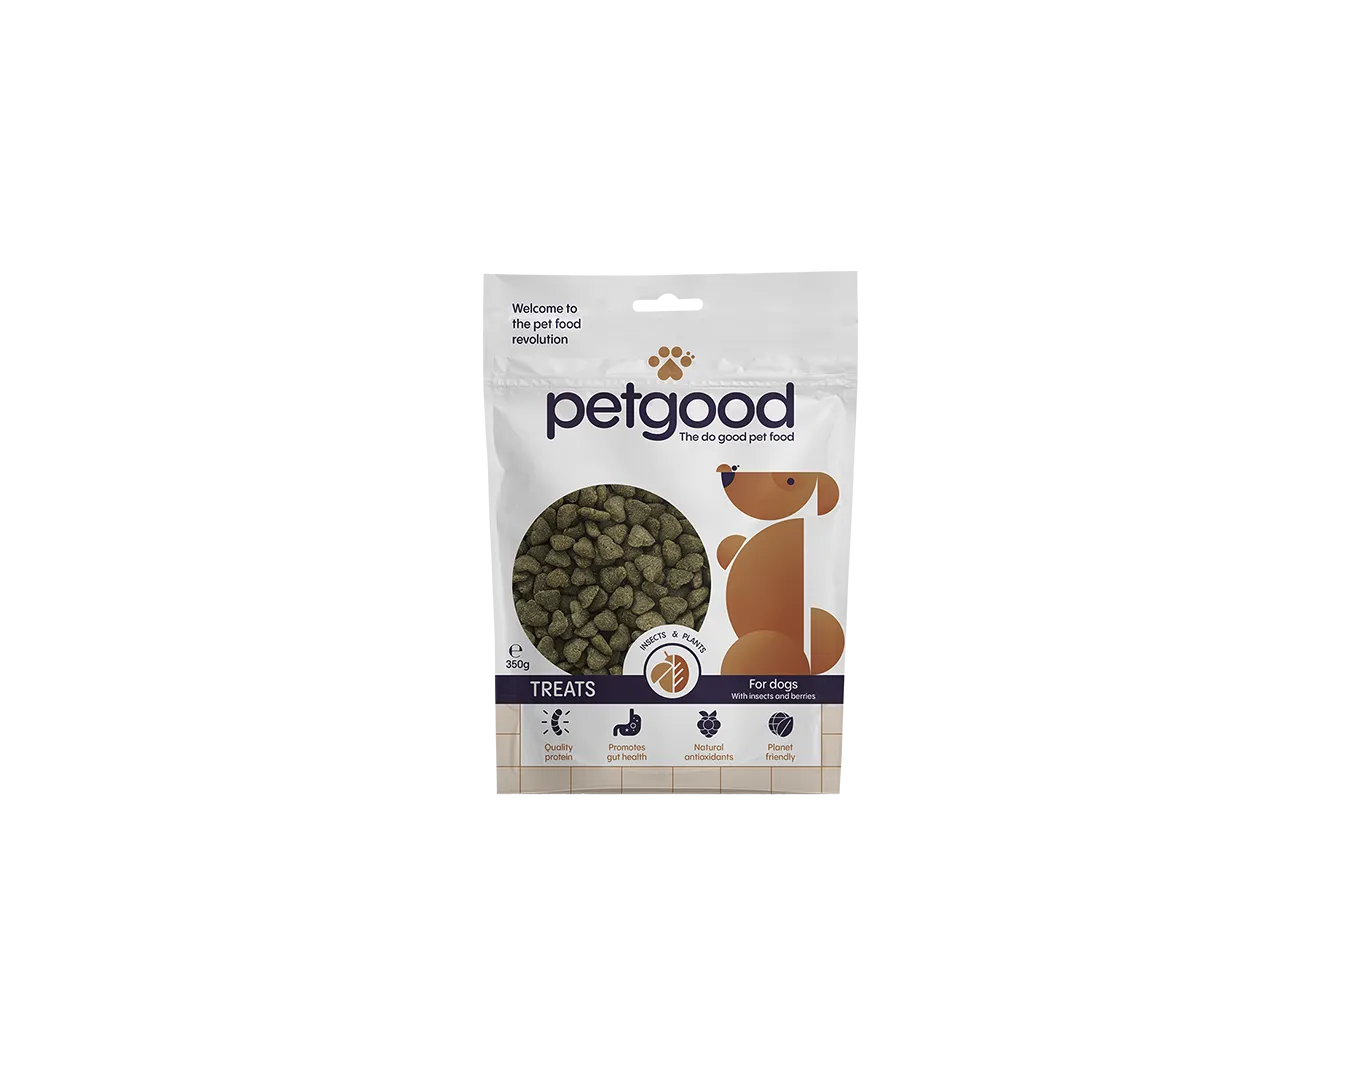 https://a.storyblok.com/f/236174/1350x1080/7a50aa6095/dog-treats-with-insect-protein-350g.webp